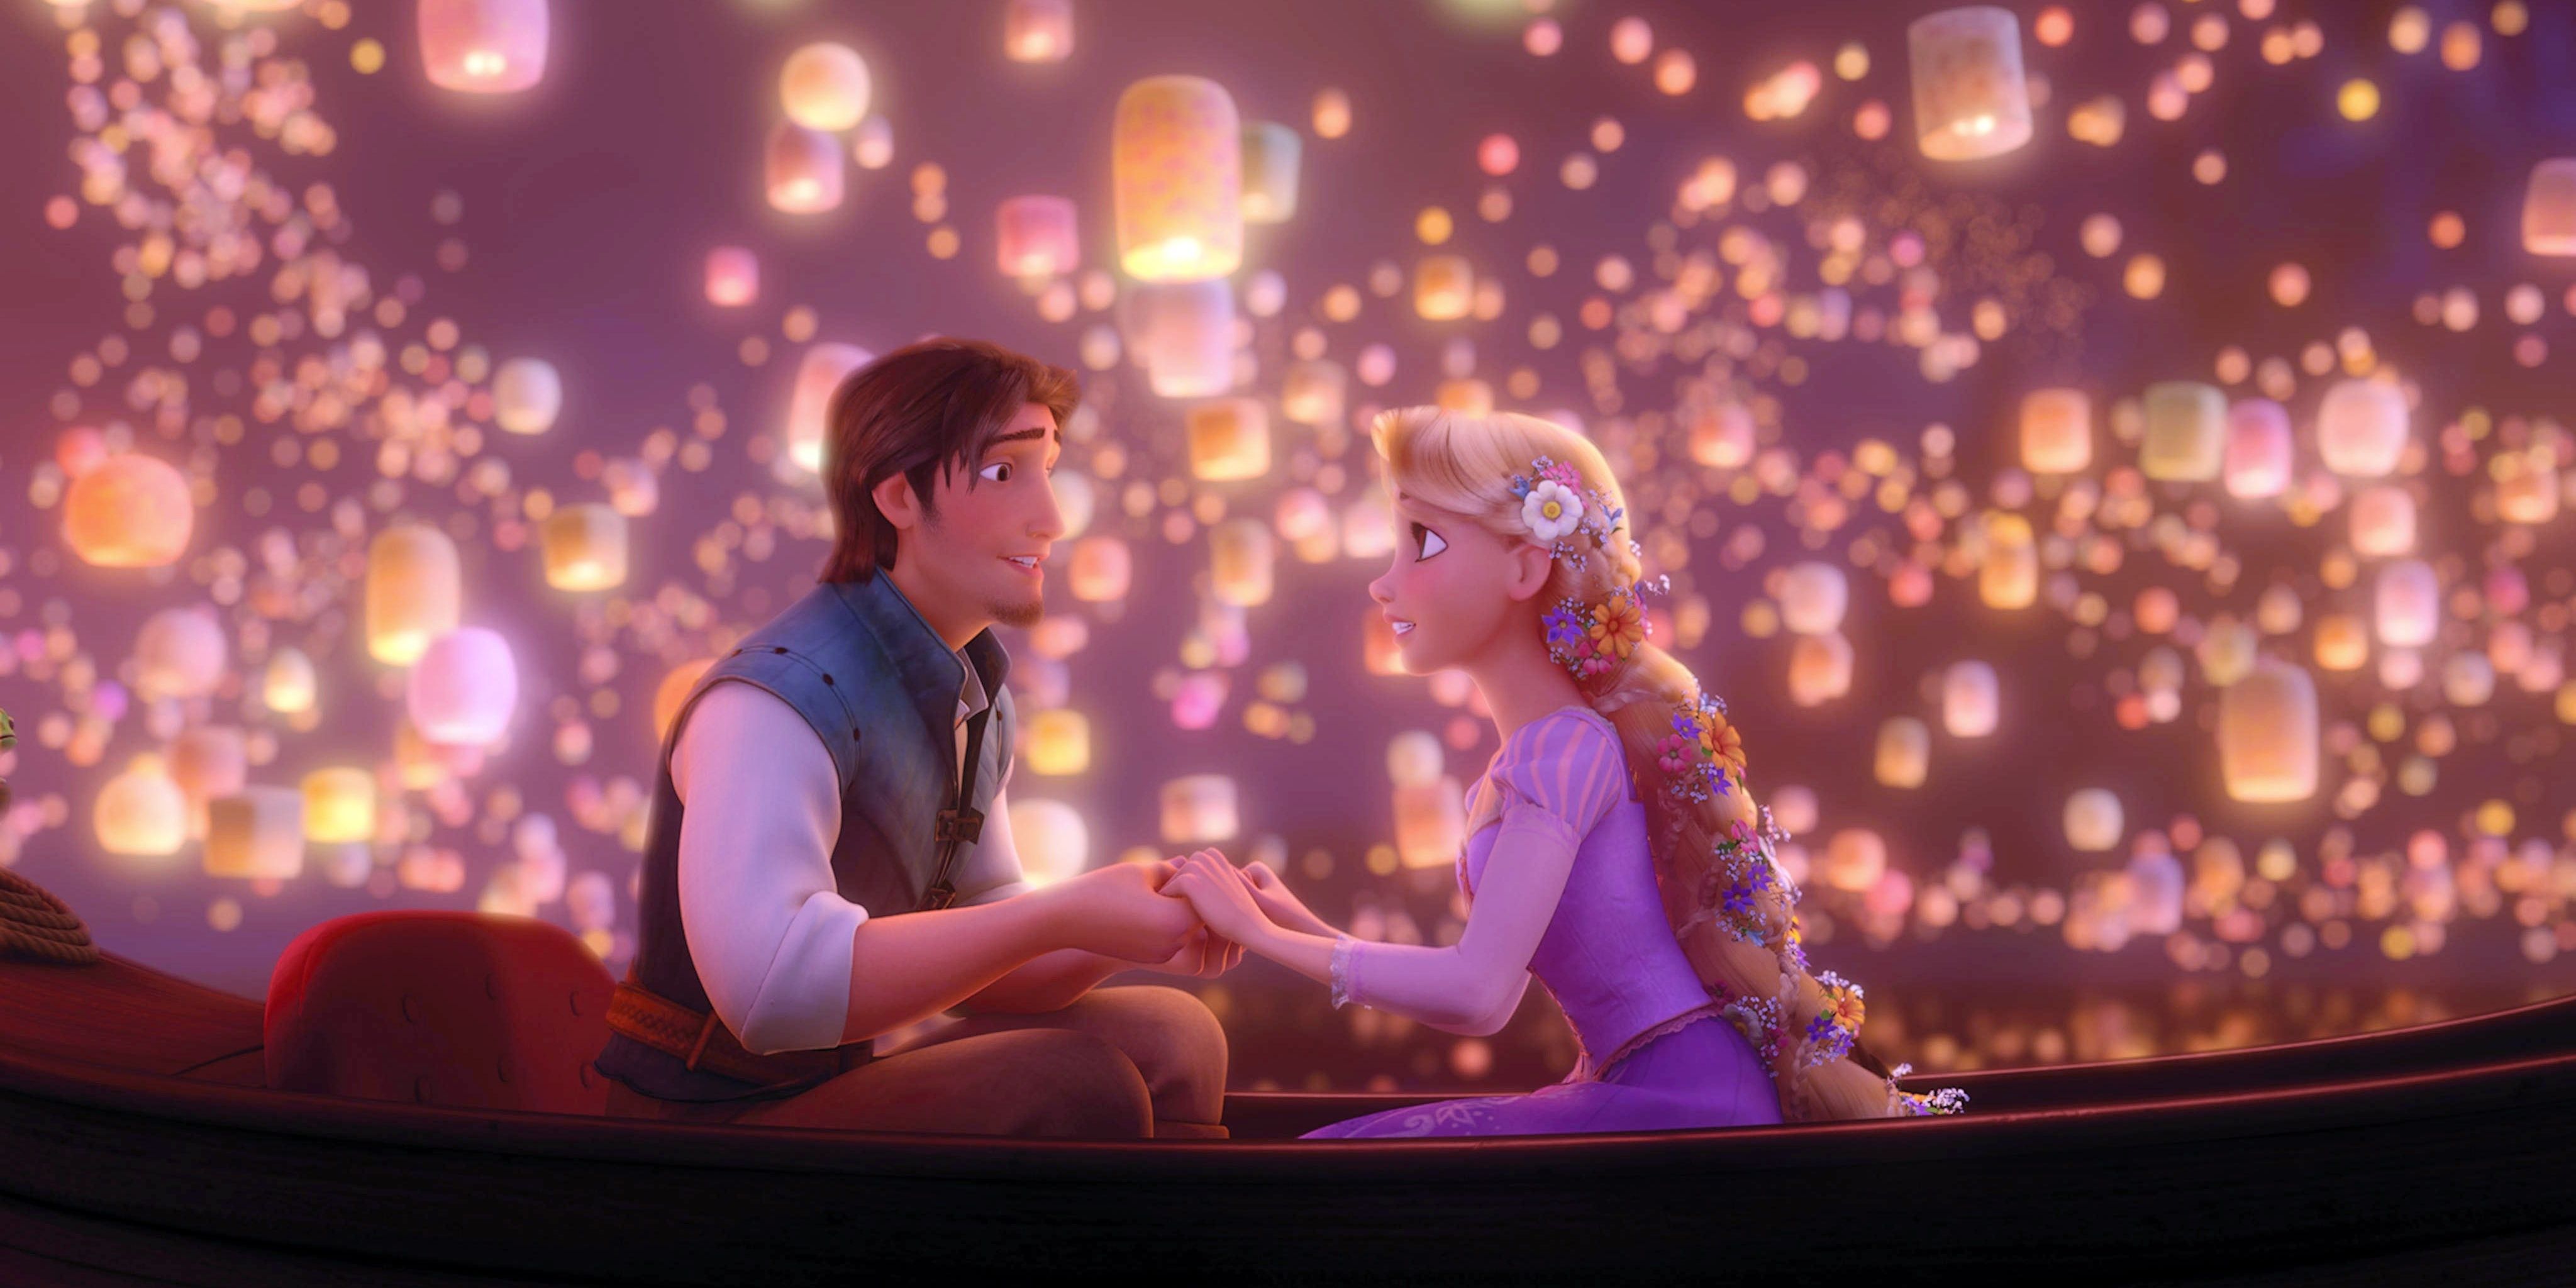 During Tangled, Flynn Rider and Rapunzel hold hands on a boat while lanterns float above them